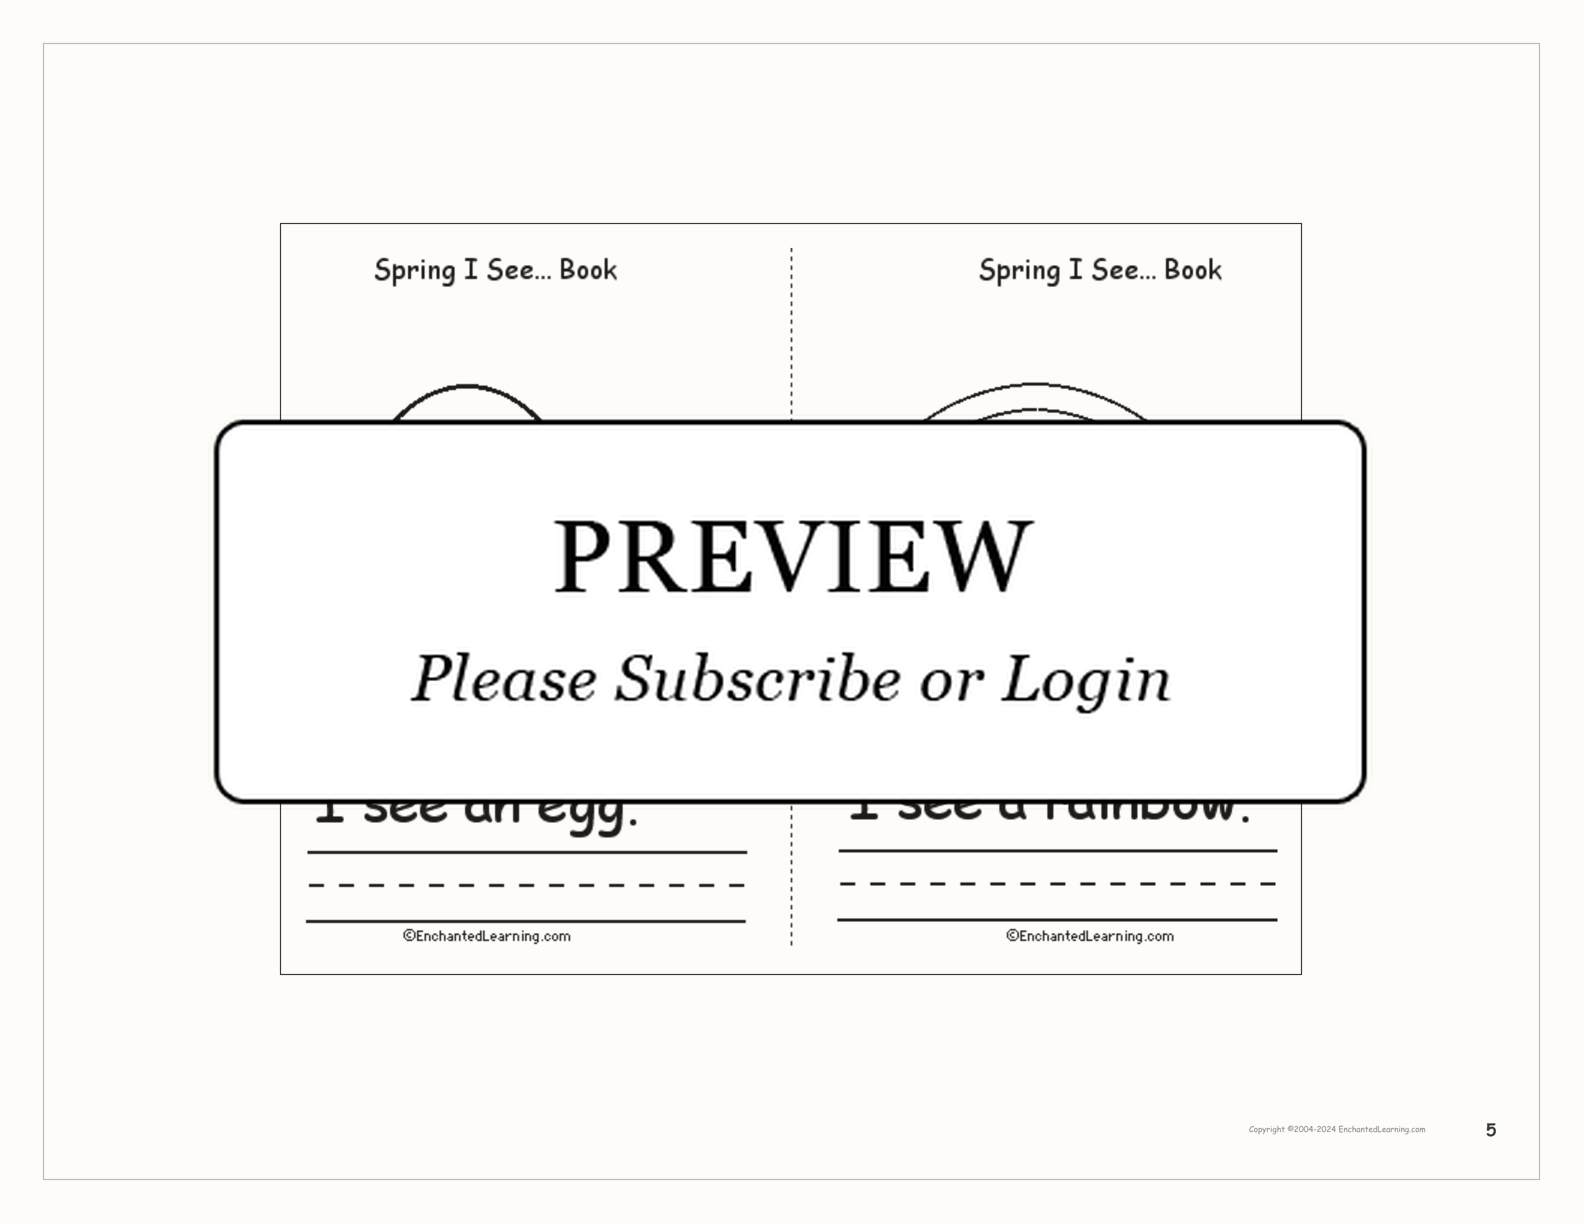 Spring I See... A Printable Book interactive worksheet page 5